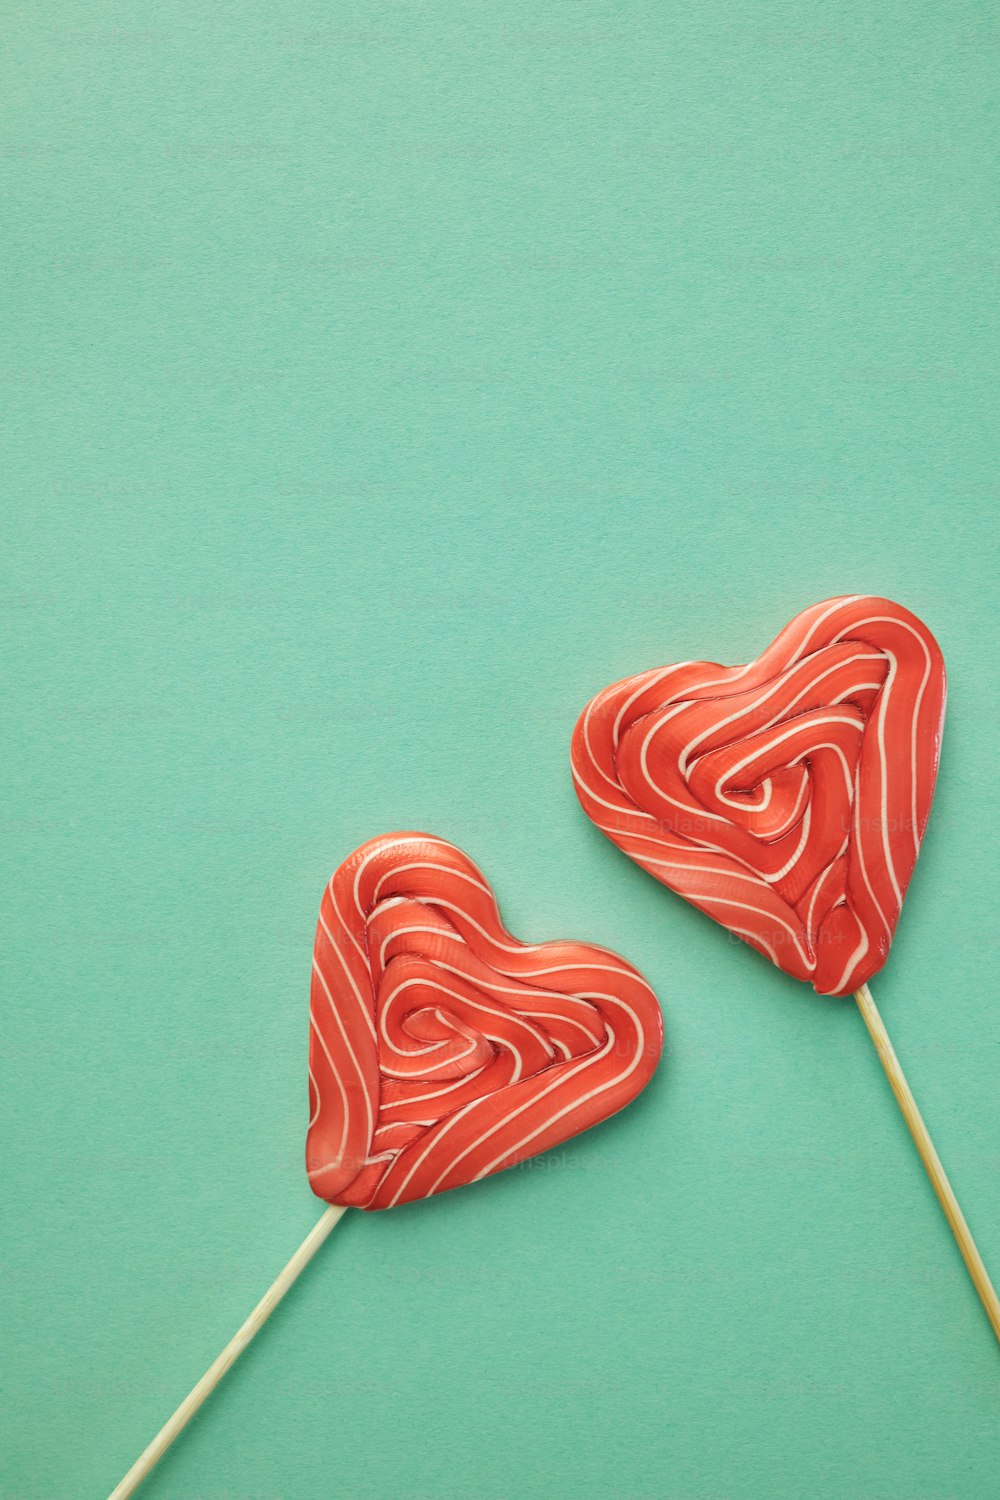 two lollipops shaped like hearts on a green background